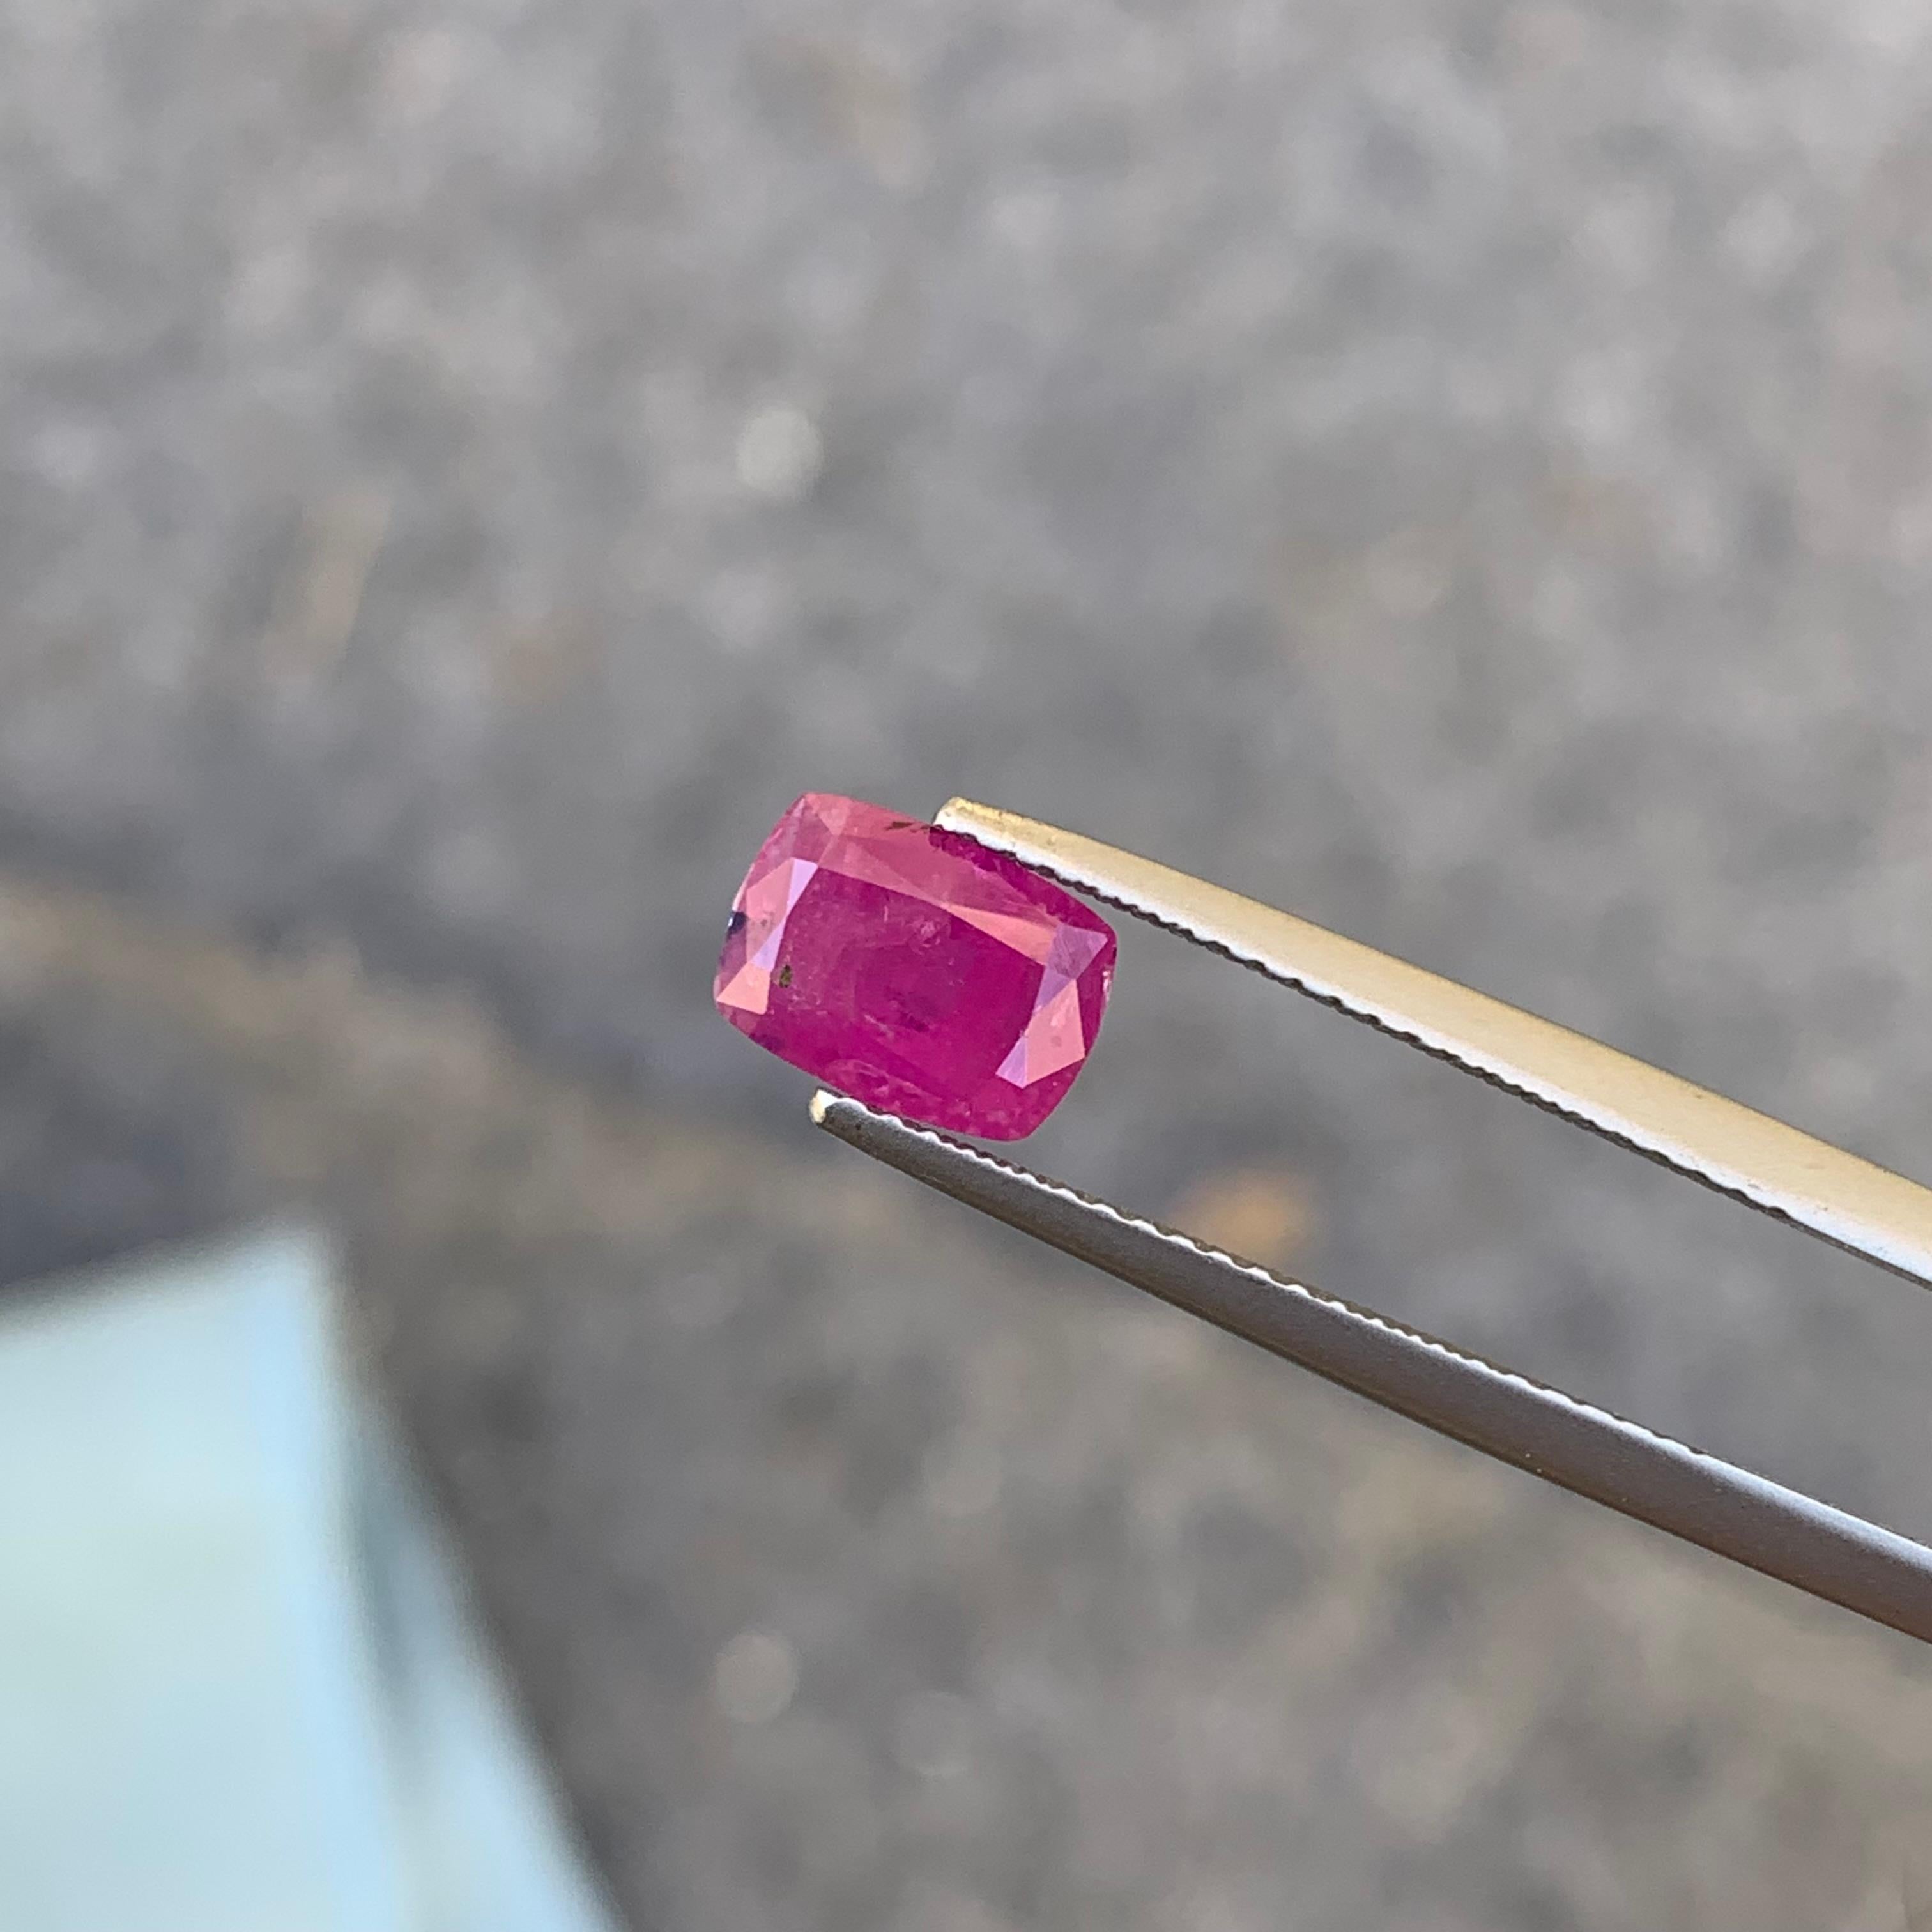 Cushion Cut Certified 1.65 Carat Natural Loose Ruby Corundum From Afghan Mine Ring Gemstone For Sale